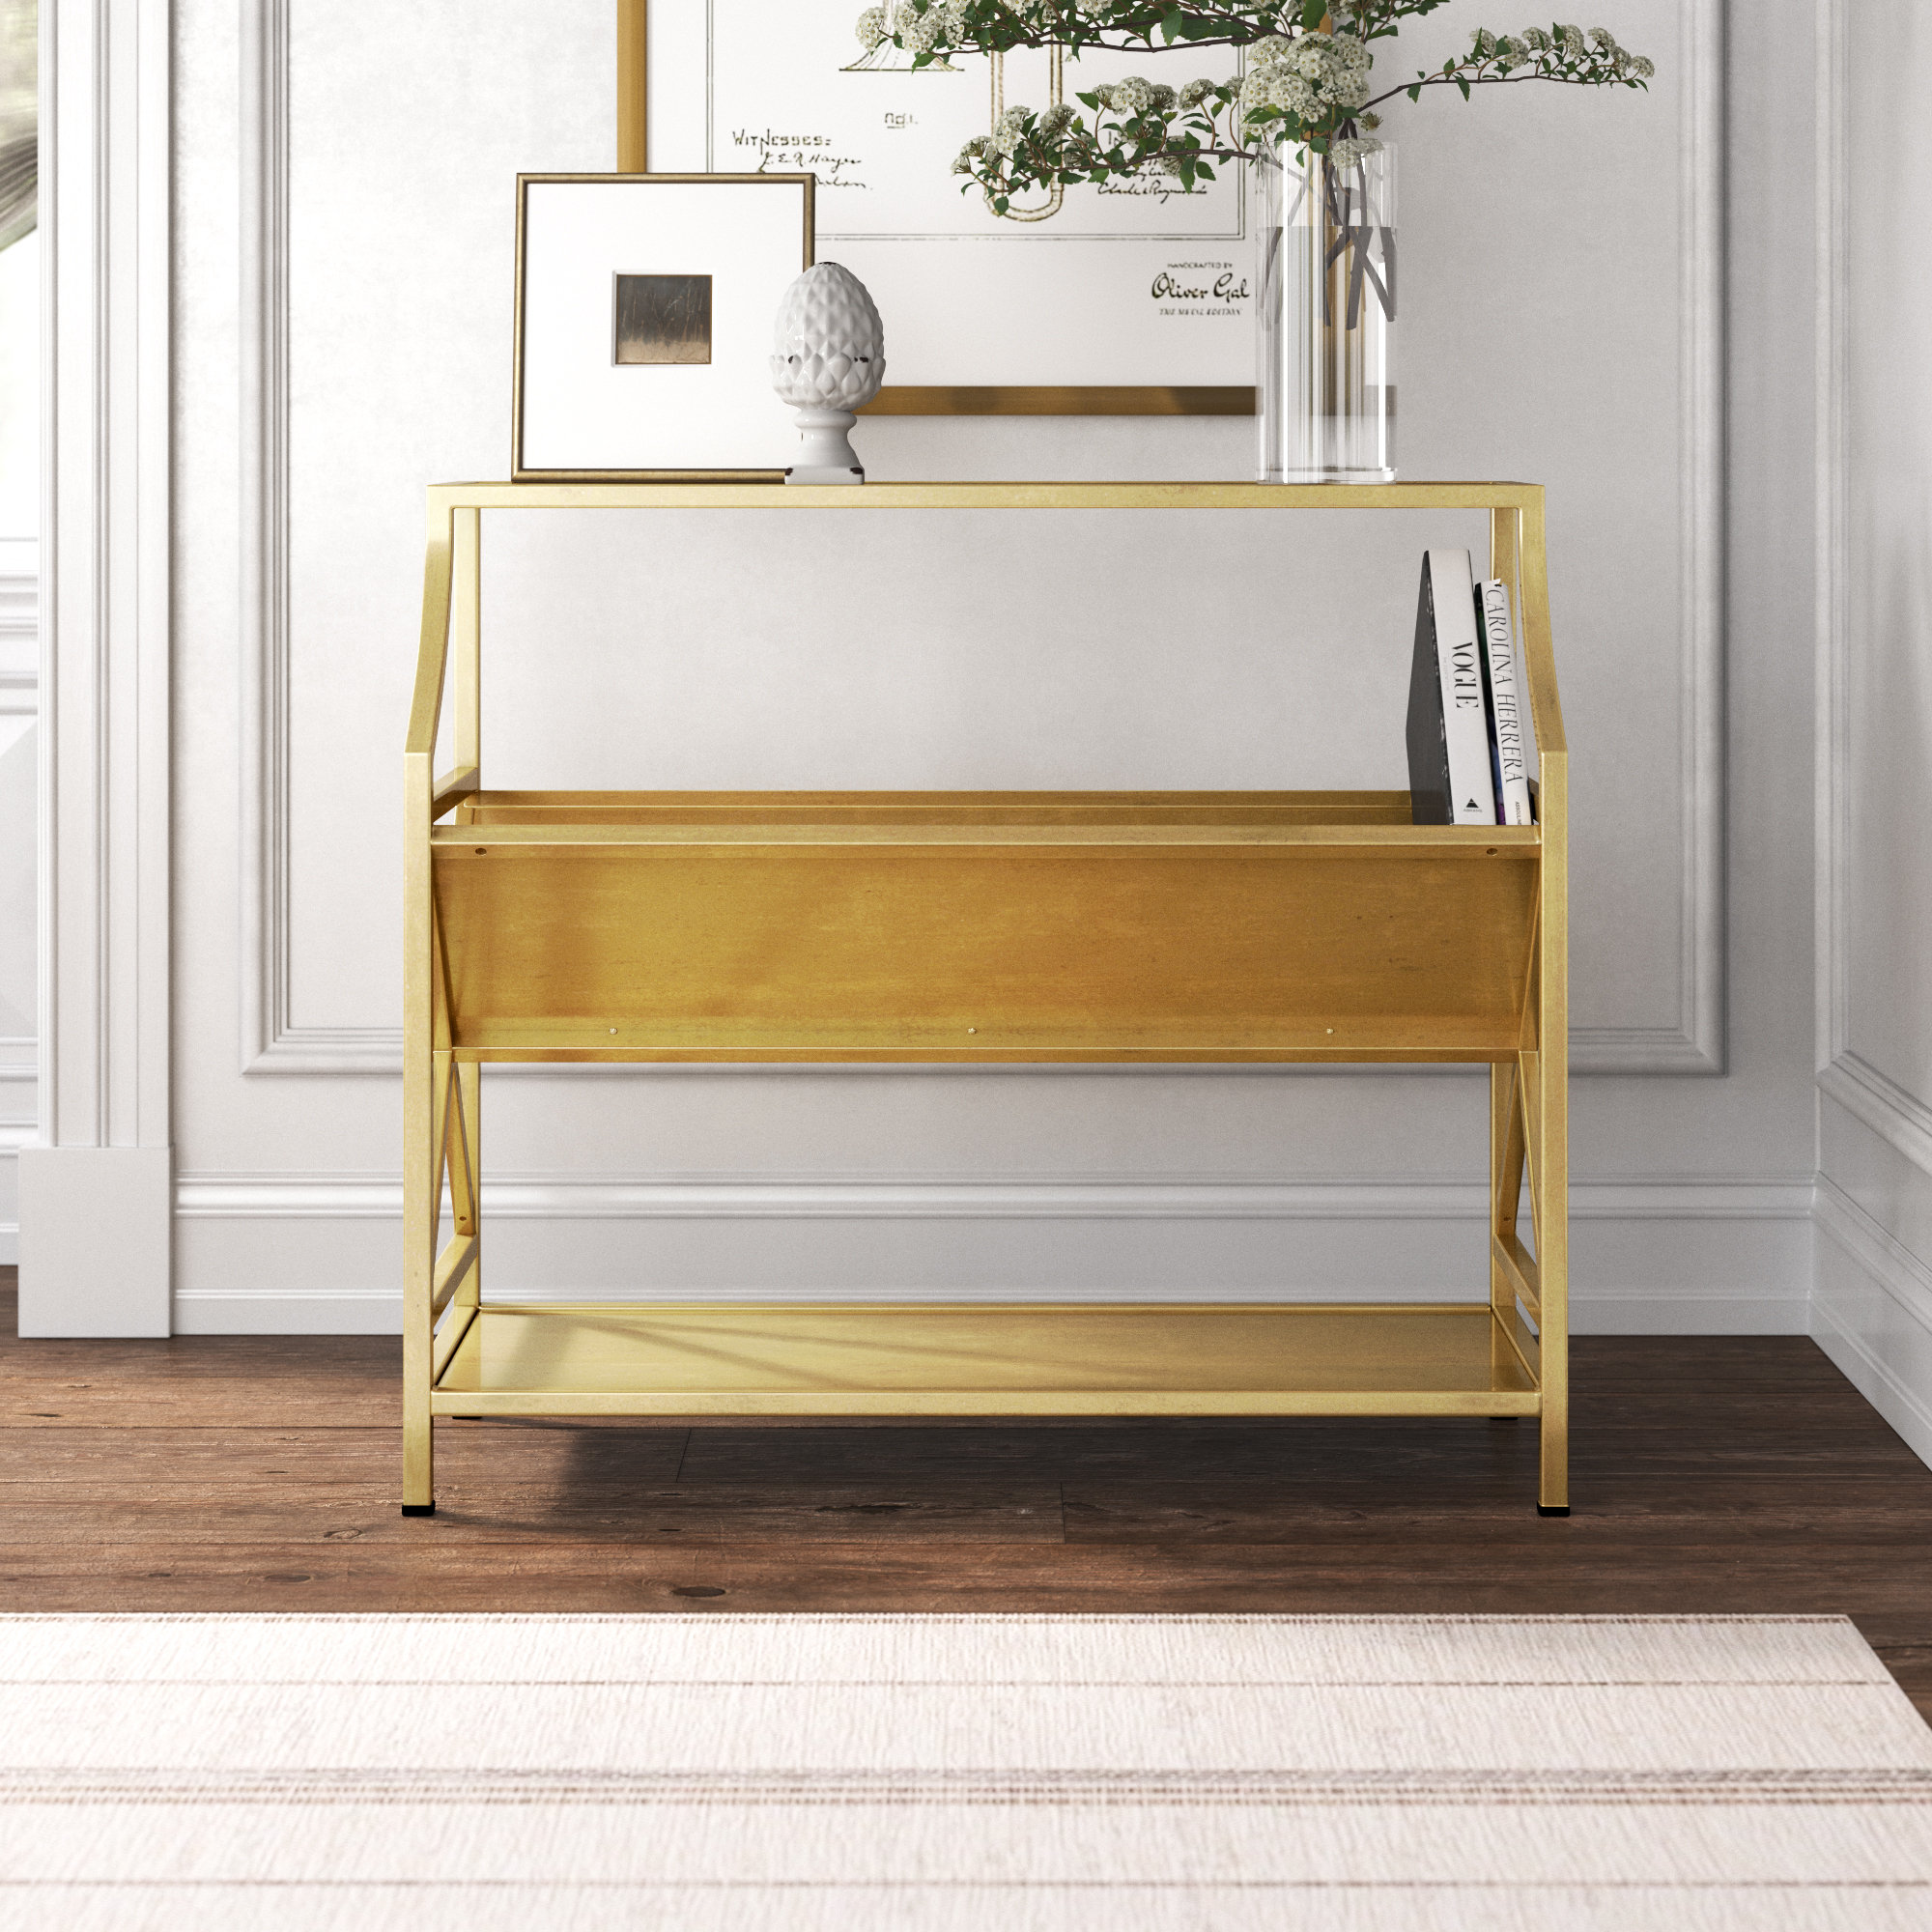 Brass Etagere Bookcases You'll Love - Wayfair Canada